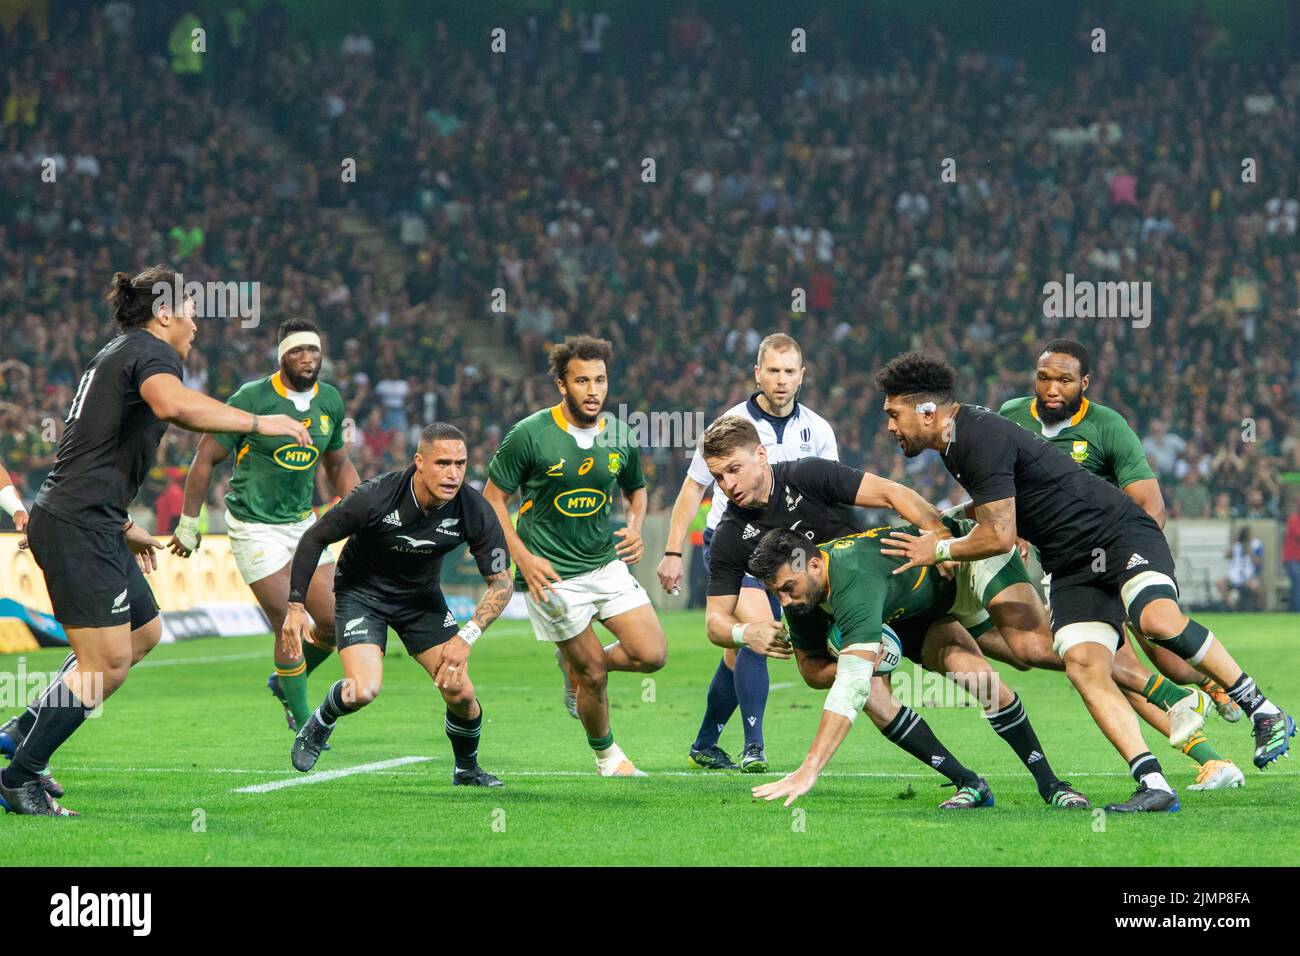 Mbombela, Nelspruit, South Africa. 6th August, 2022.  De Allende with the ball as several All Blacks defend Credit: AfriPics.com/Alamy Live News Stock Photo